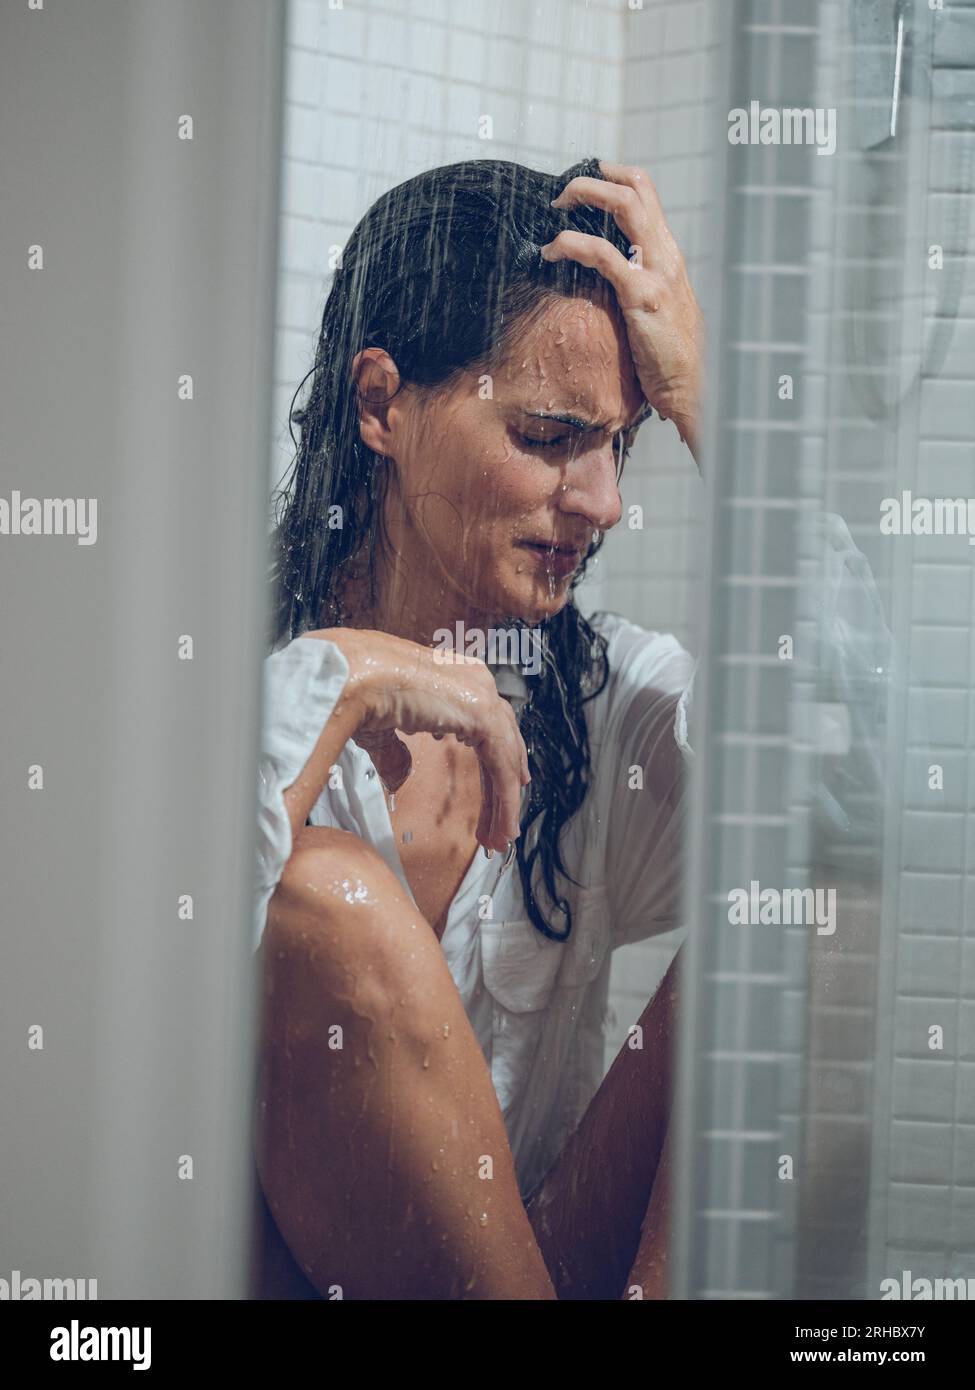 Sorrowing woman with long hair getting shower in white shirt while sitting behind transparent curtain Stock Photo